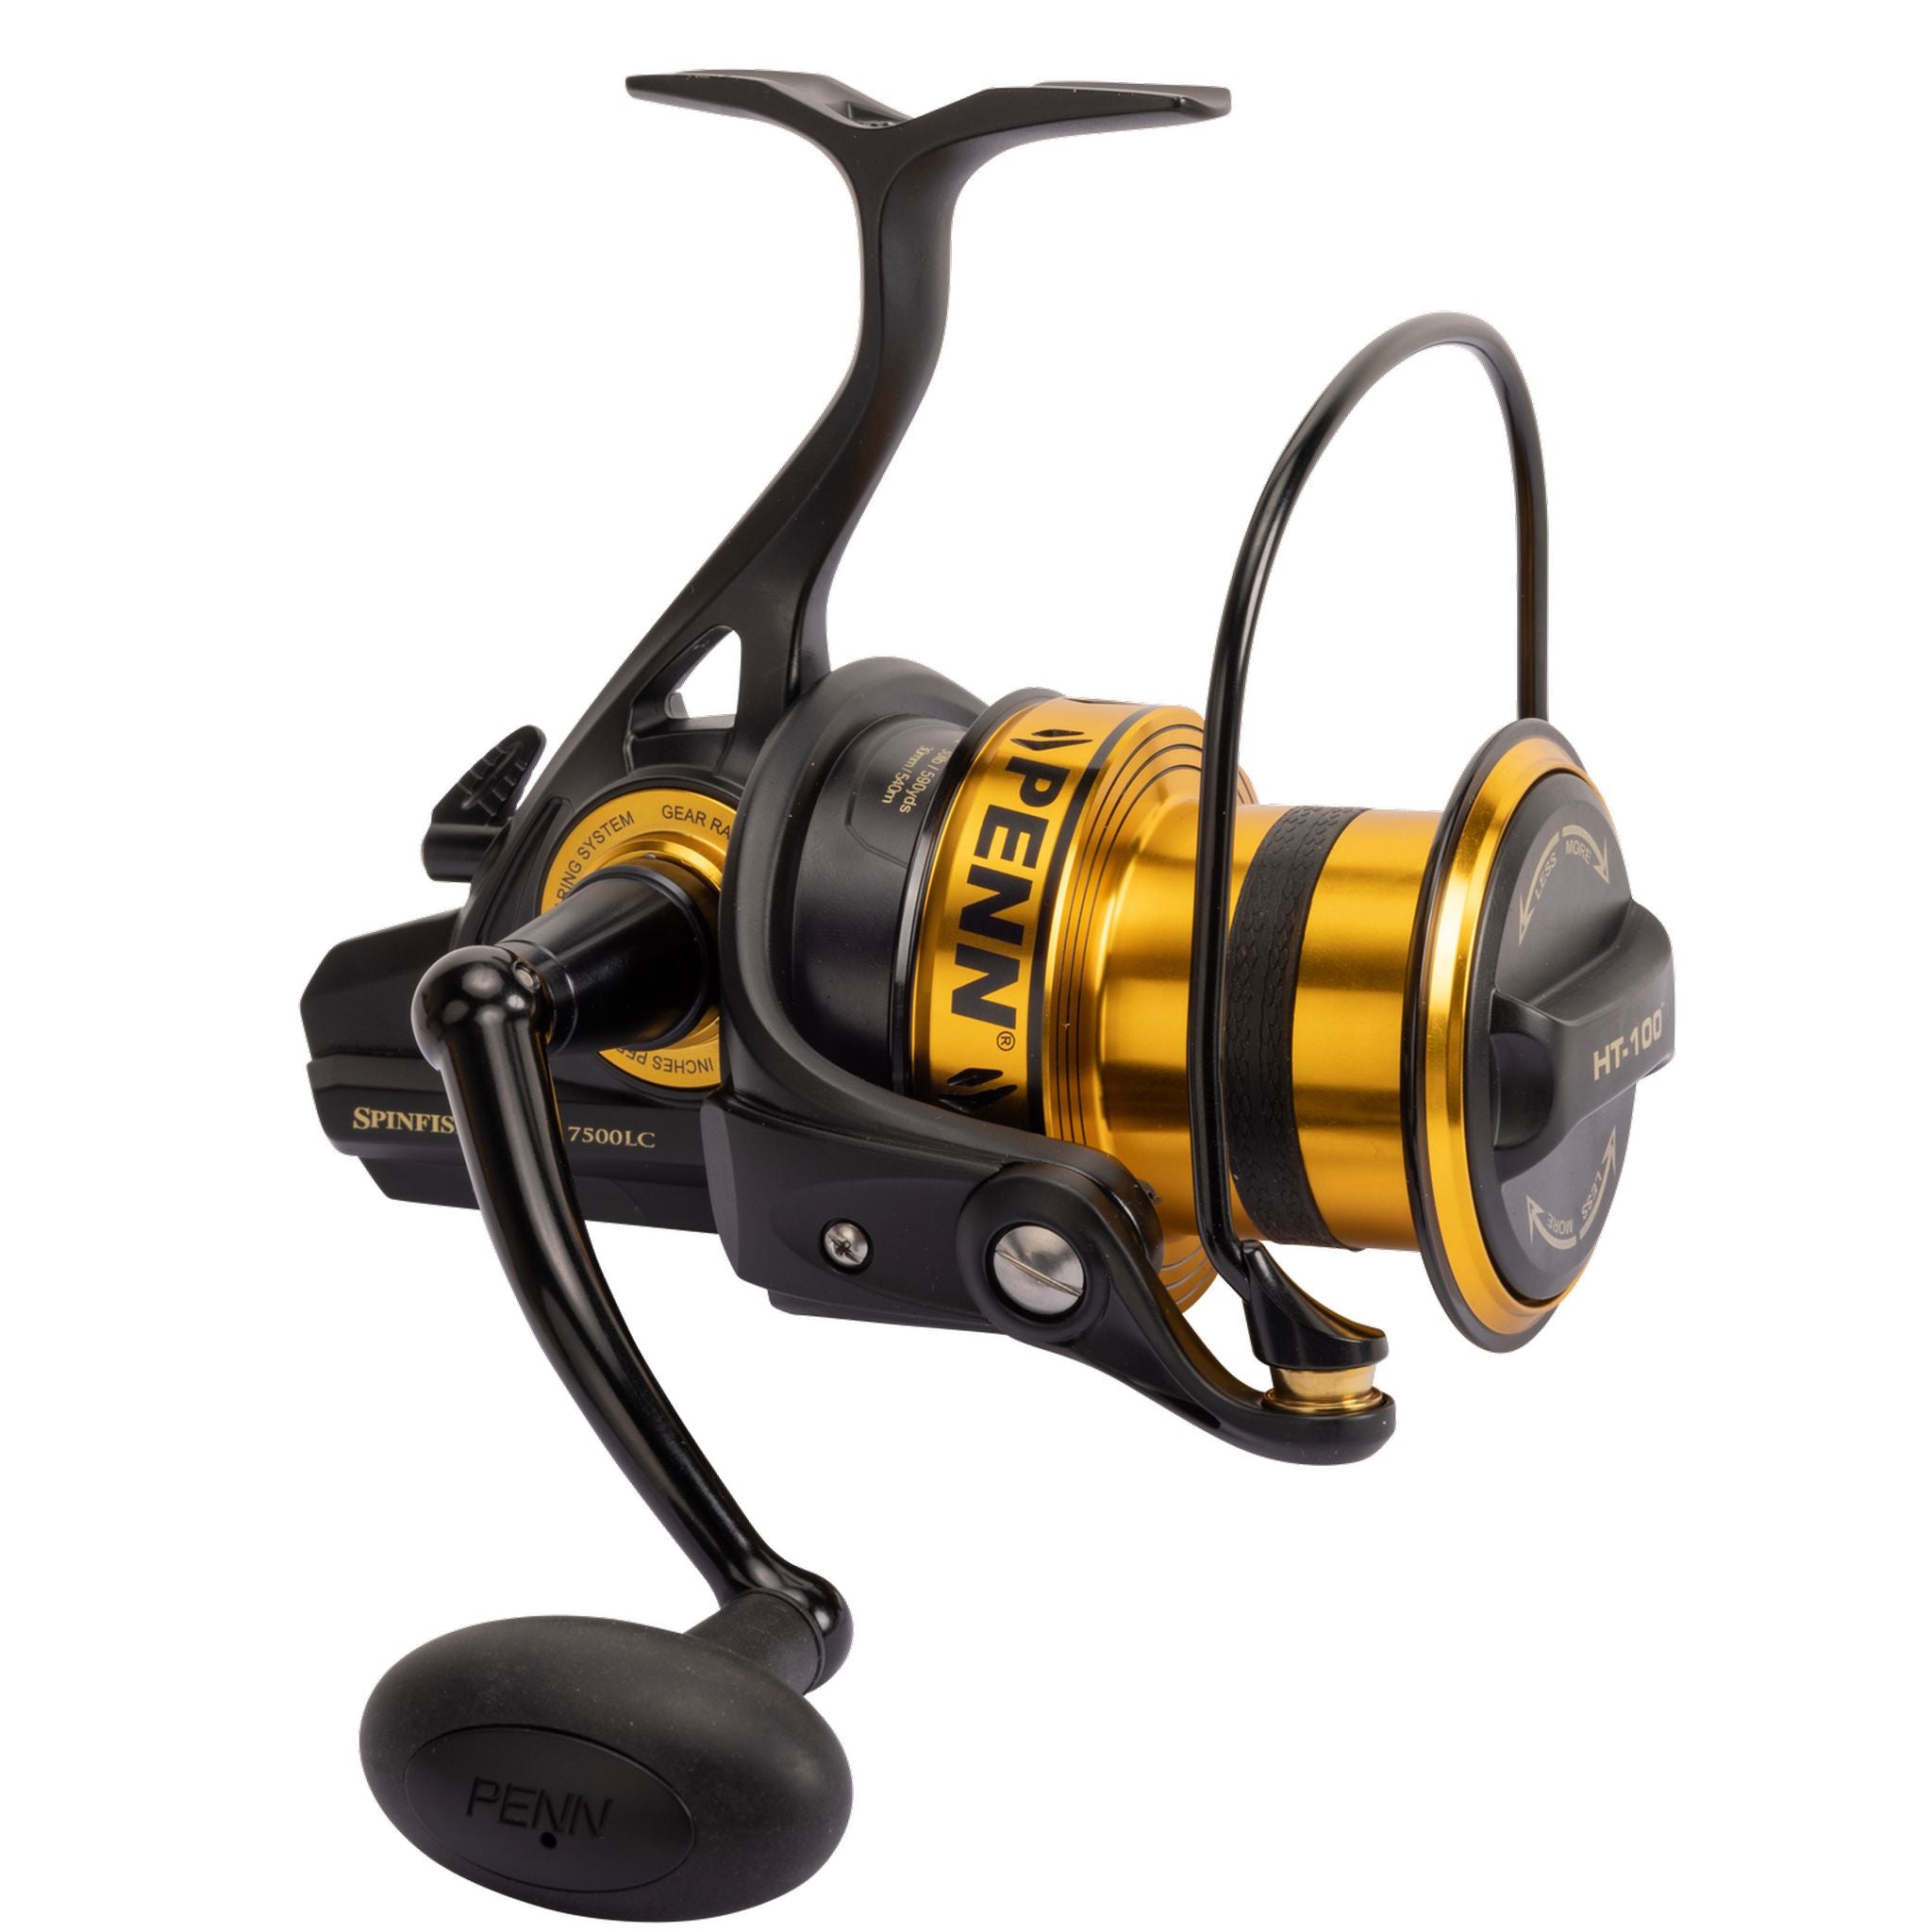 Penn Spinfisher vii 7500LC SP BX Spin Reel